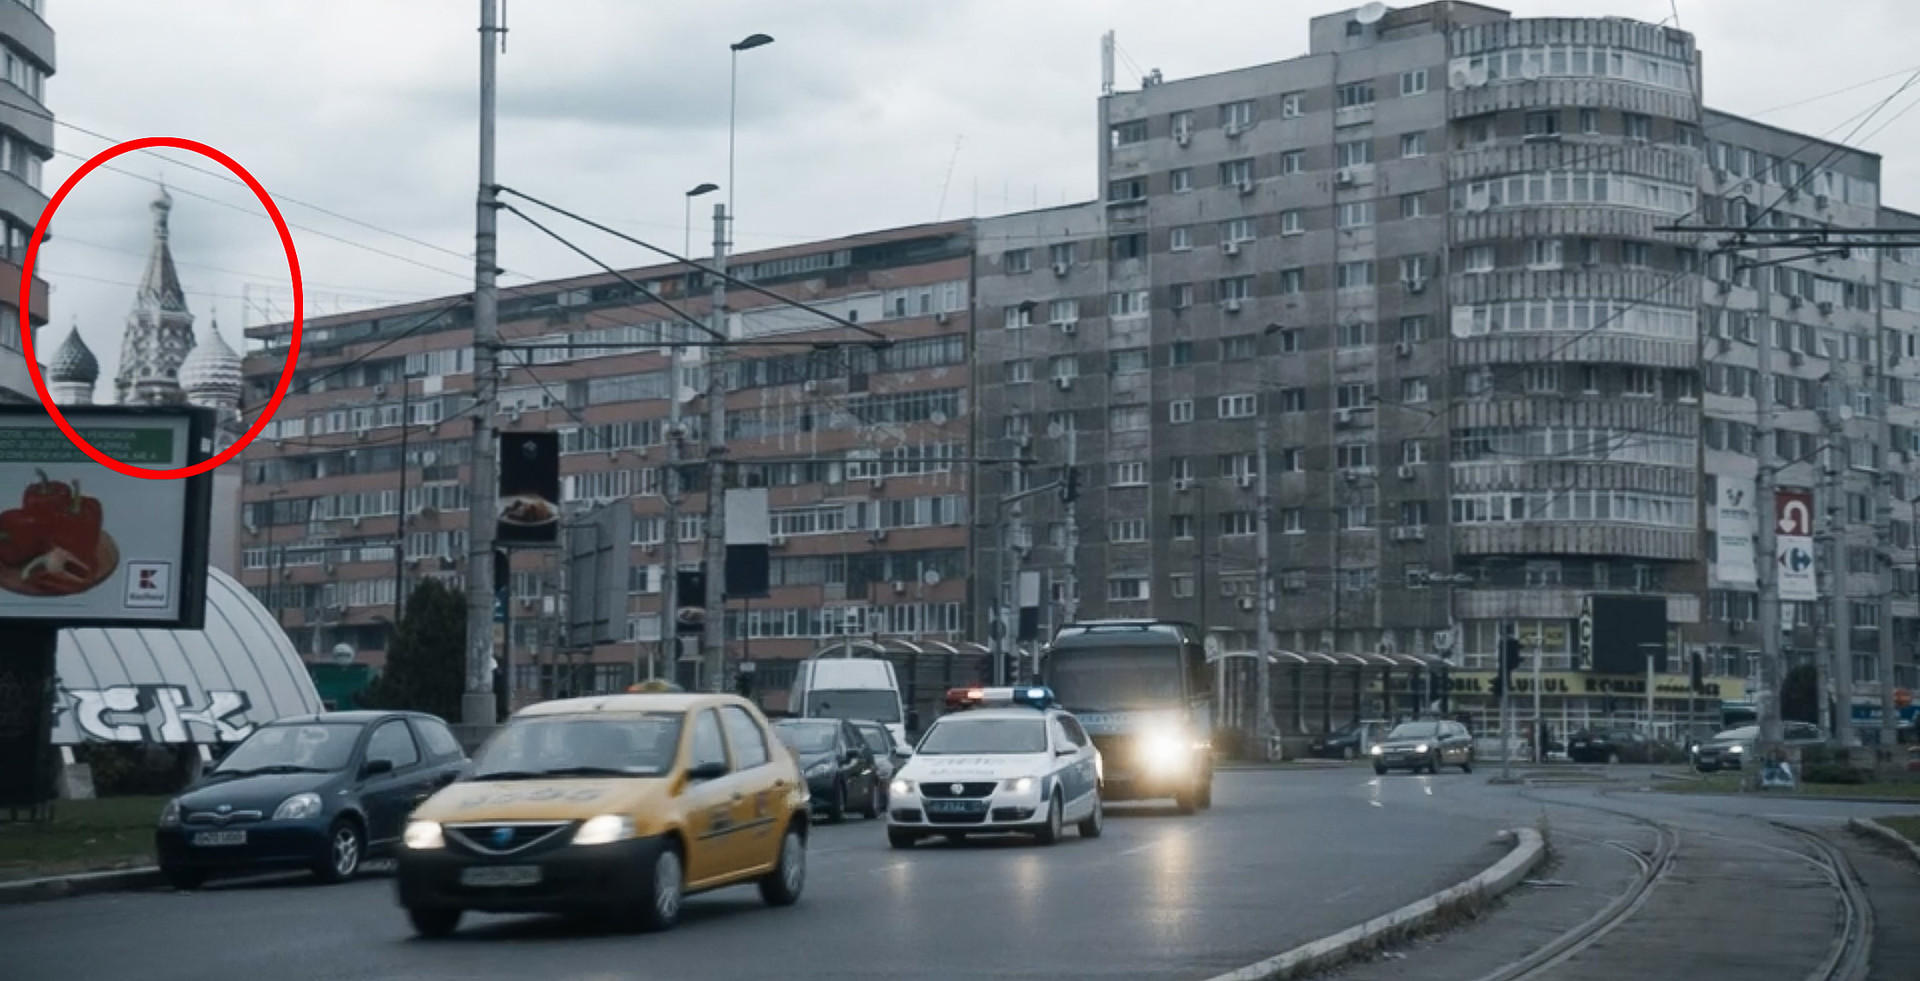 This scene from Killing Eve is pure Bucharest, complete with license plates and adverts in Romanian - but Moscow's St. Basil's Cathedral was edited into the background to make it look more like Moscow